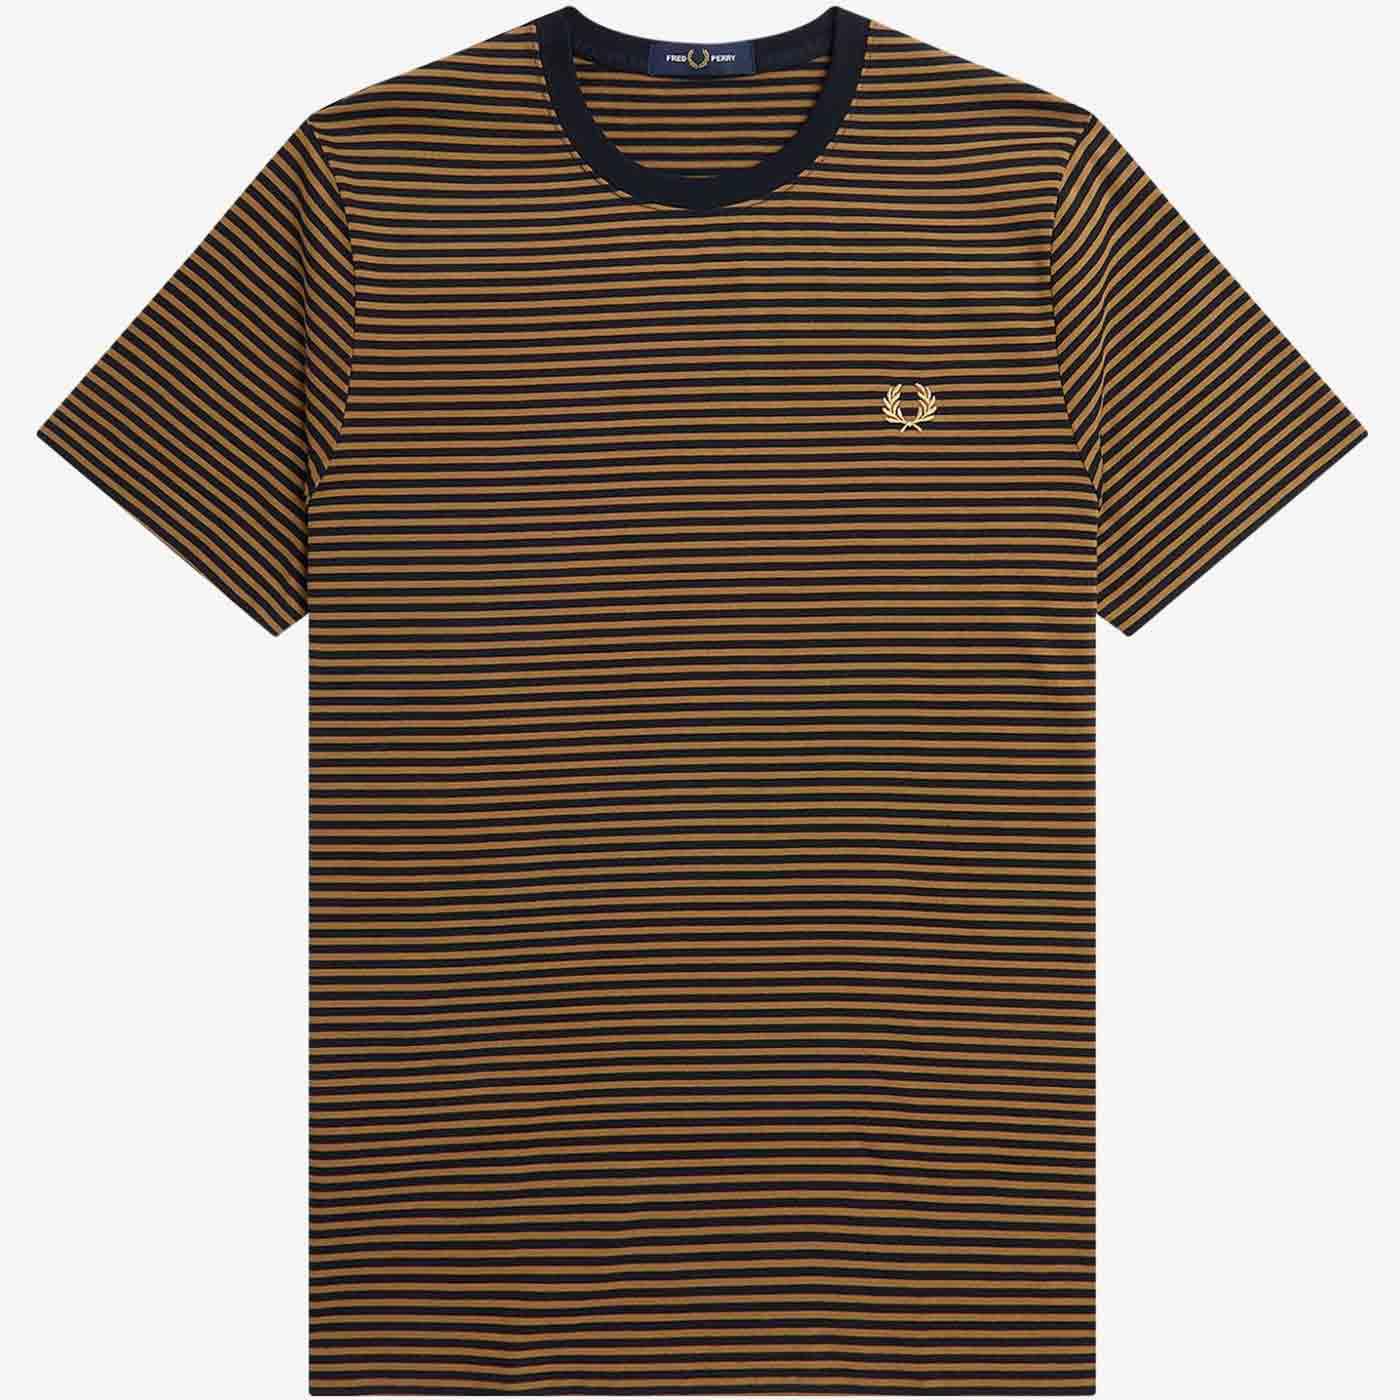 Fred Perry Retro Fine Stripe Tee Shaded Stone/Navy